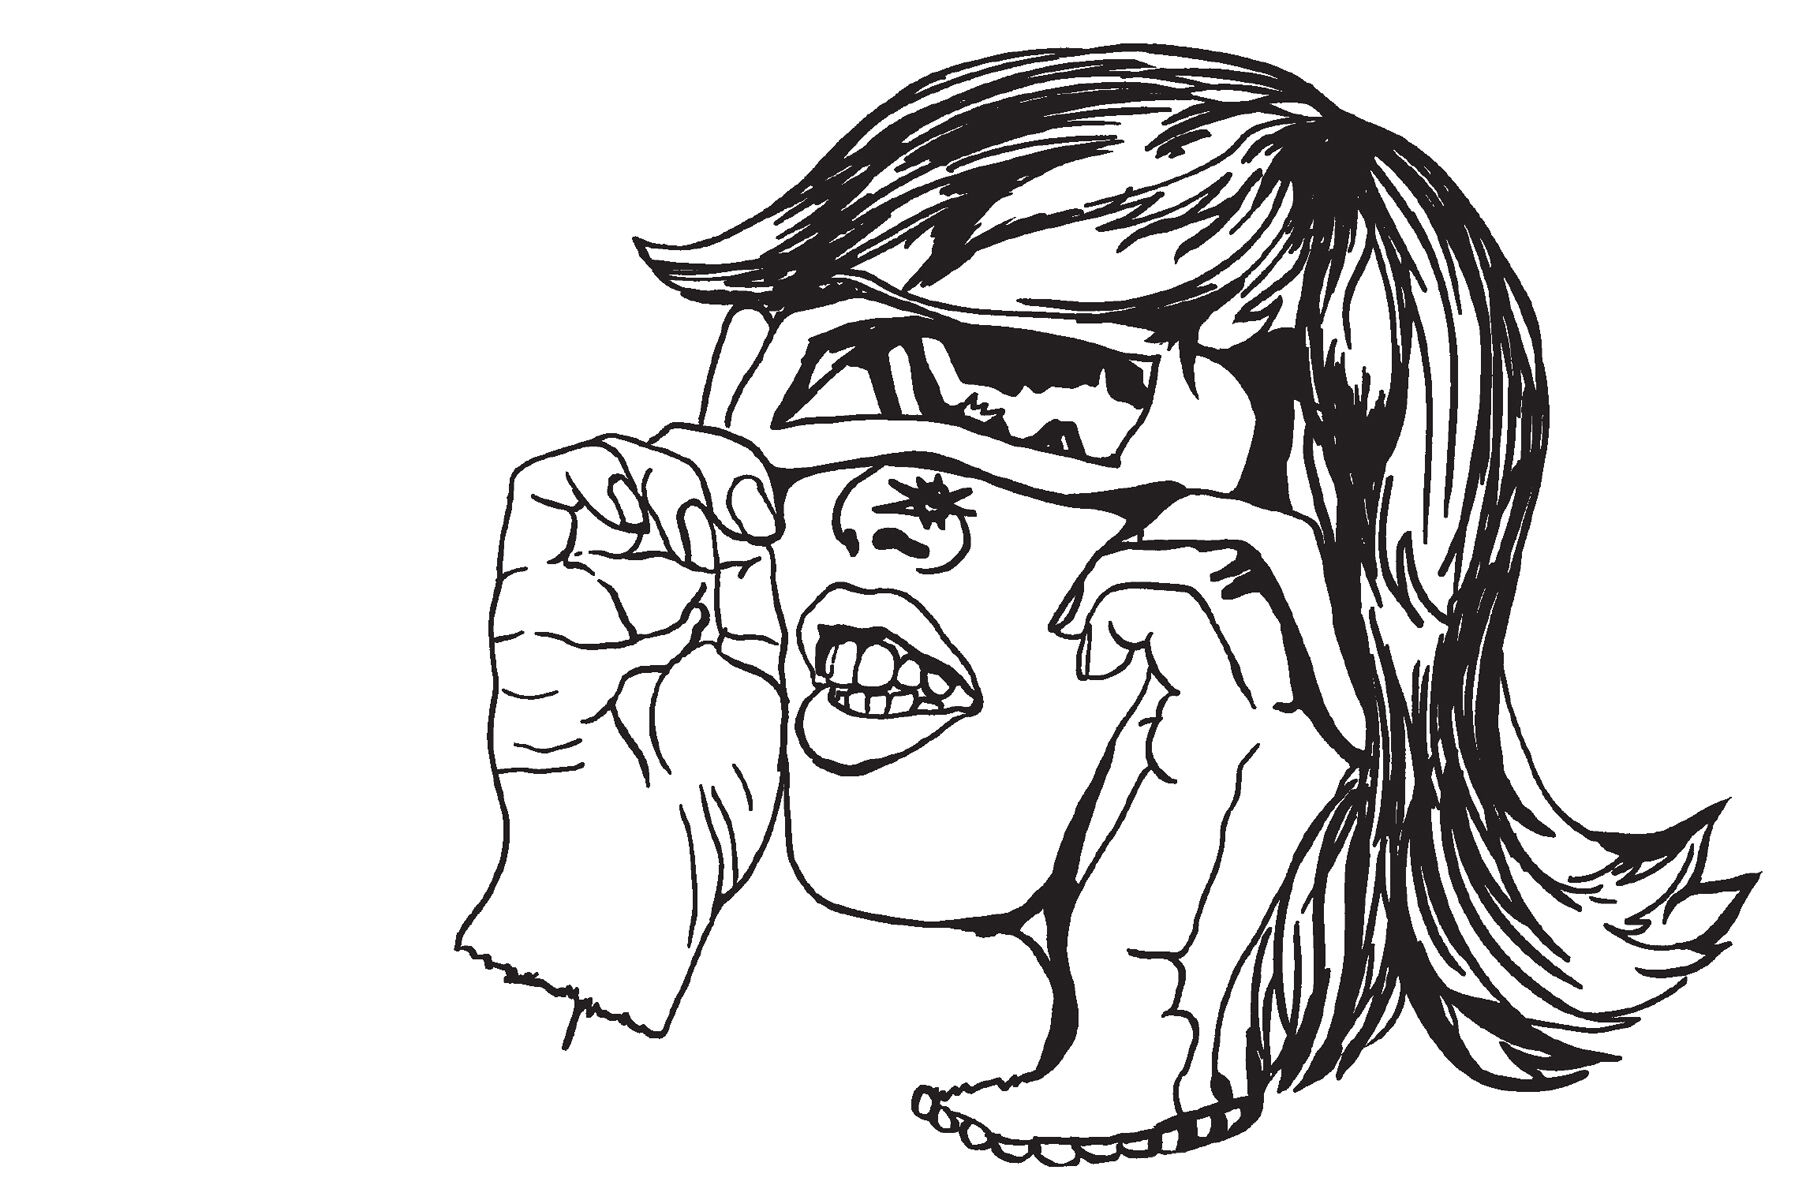 A black and white drawing of a person with sunglasses on looking at a floating orb of scientific tools